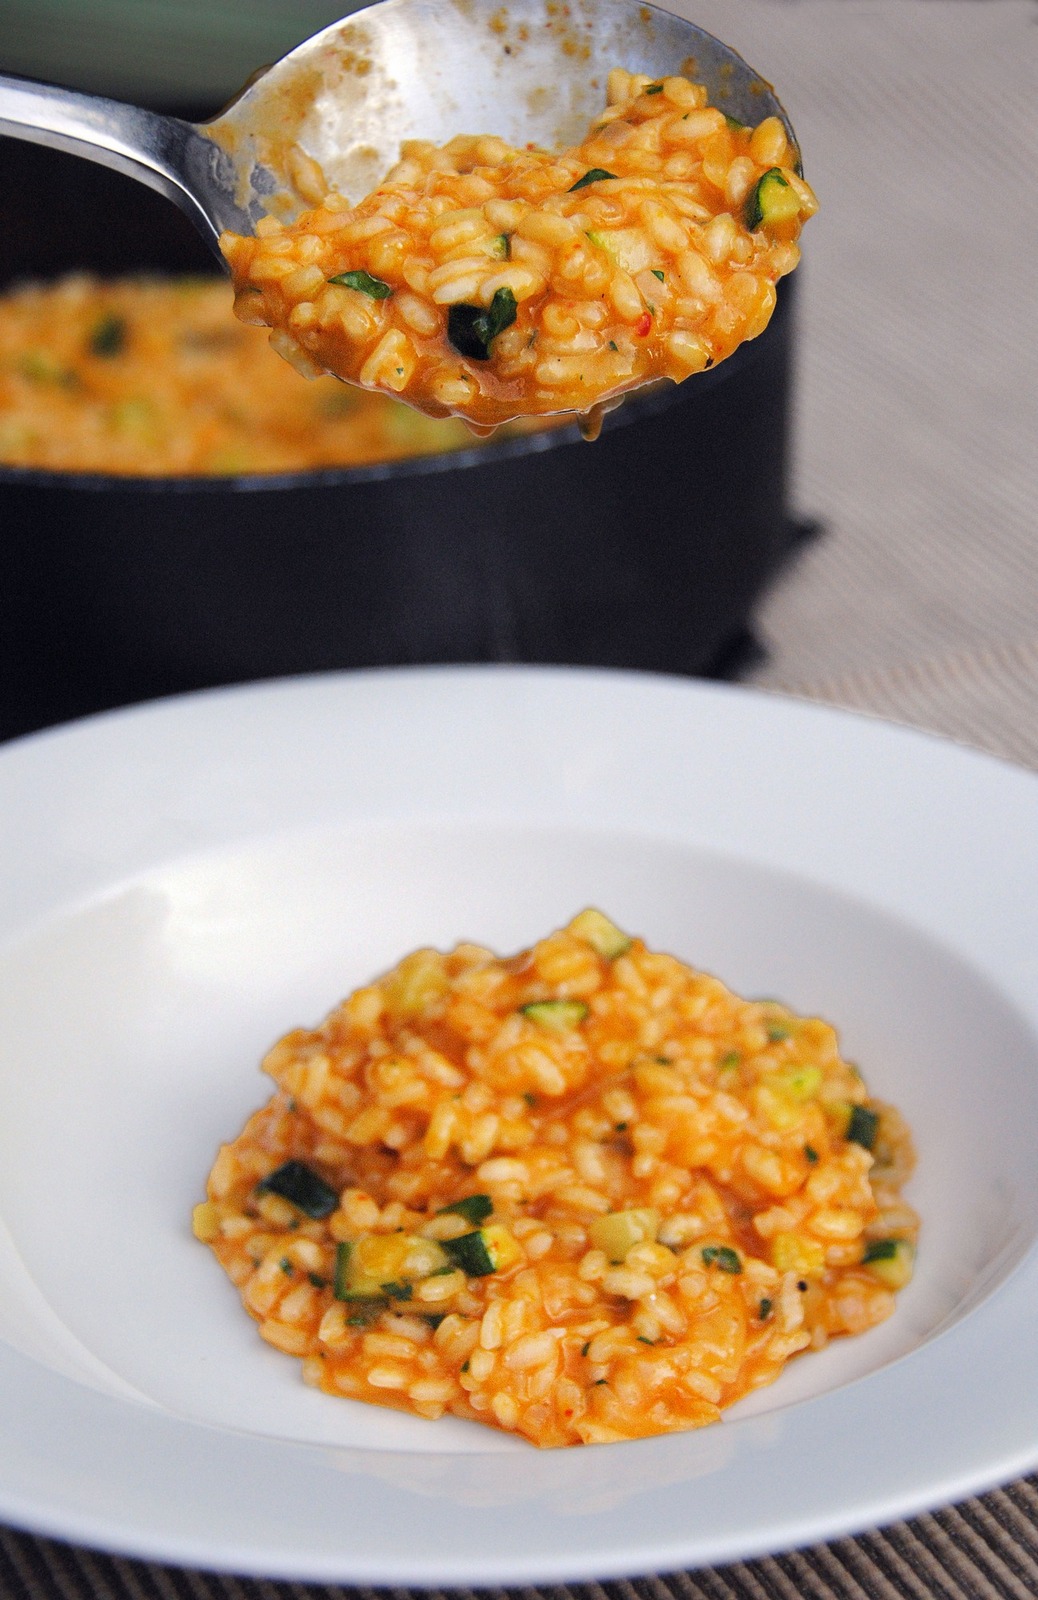 Yellow and Red Pepper Risotto with Zucchini Being Served from Black Pot